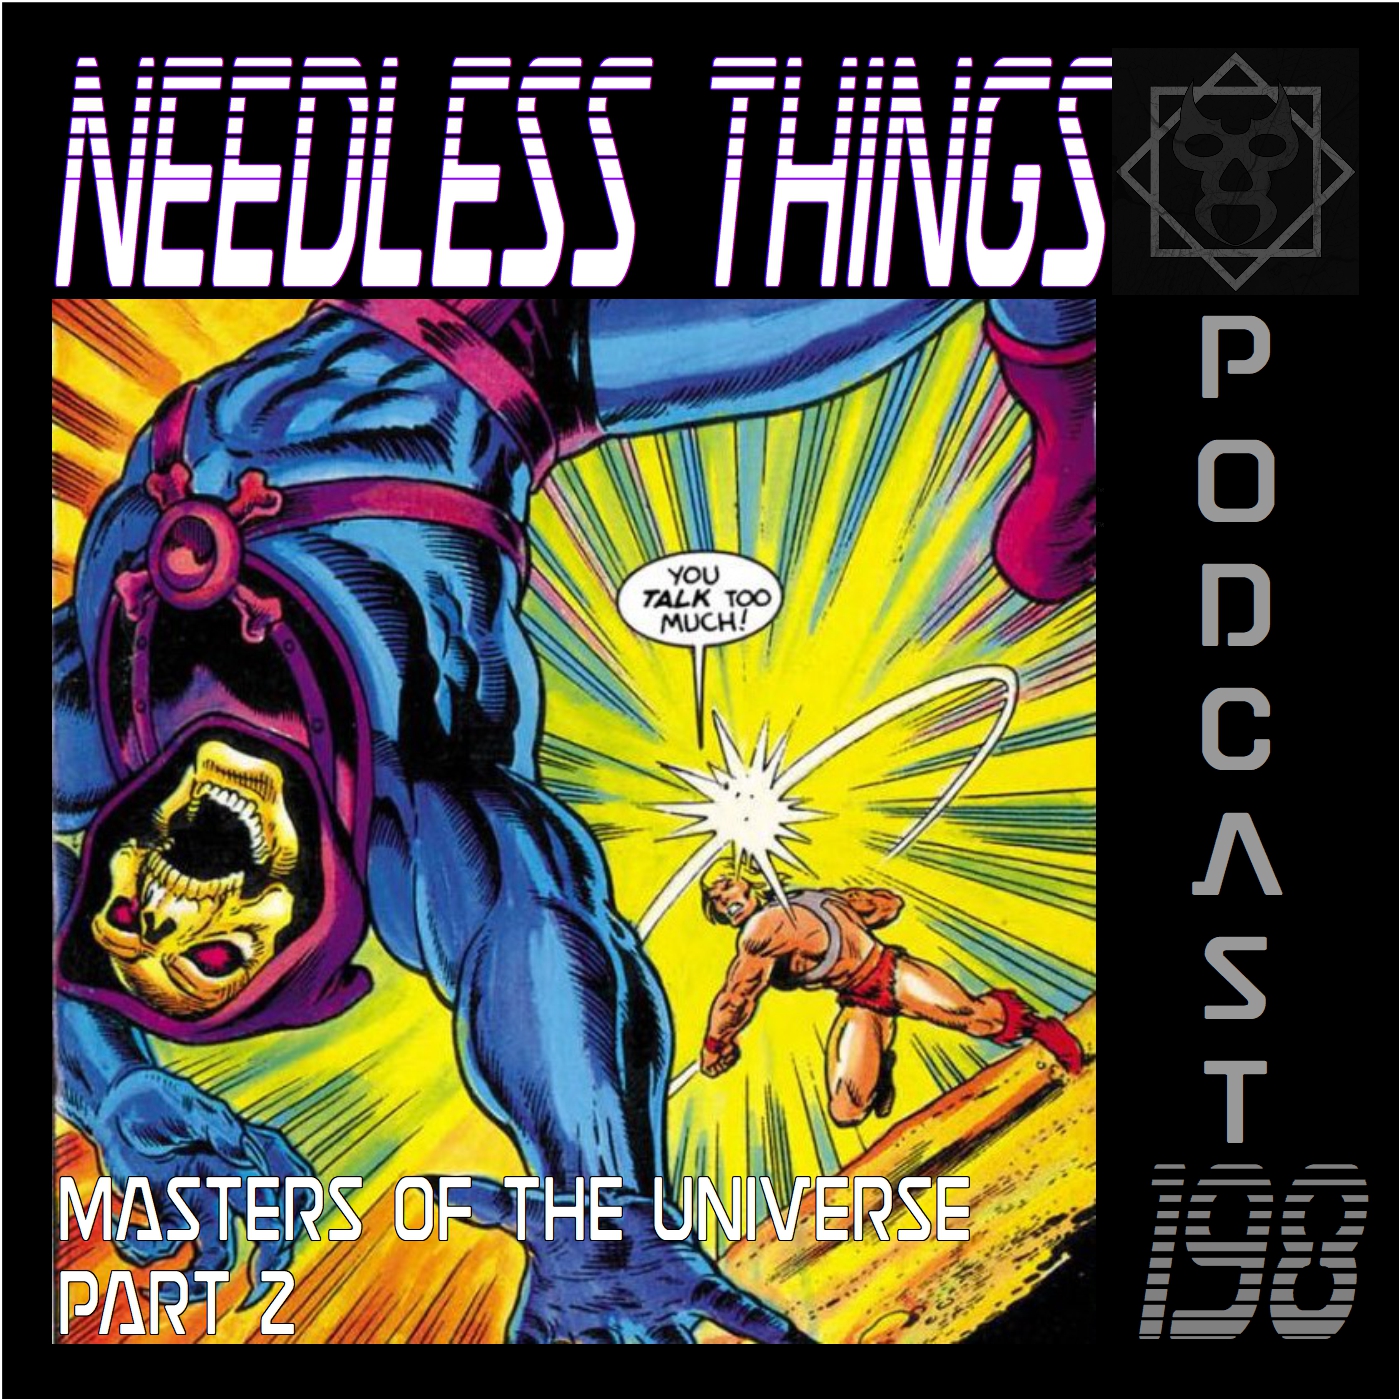 Needless Things Podcast 198 – Masters of the Universe Part 2